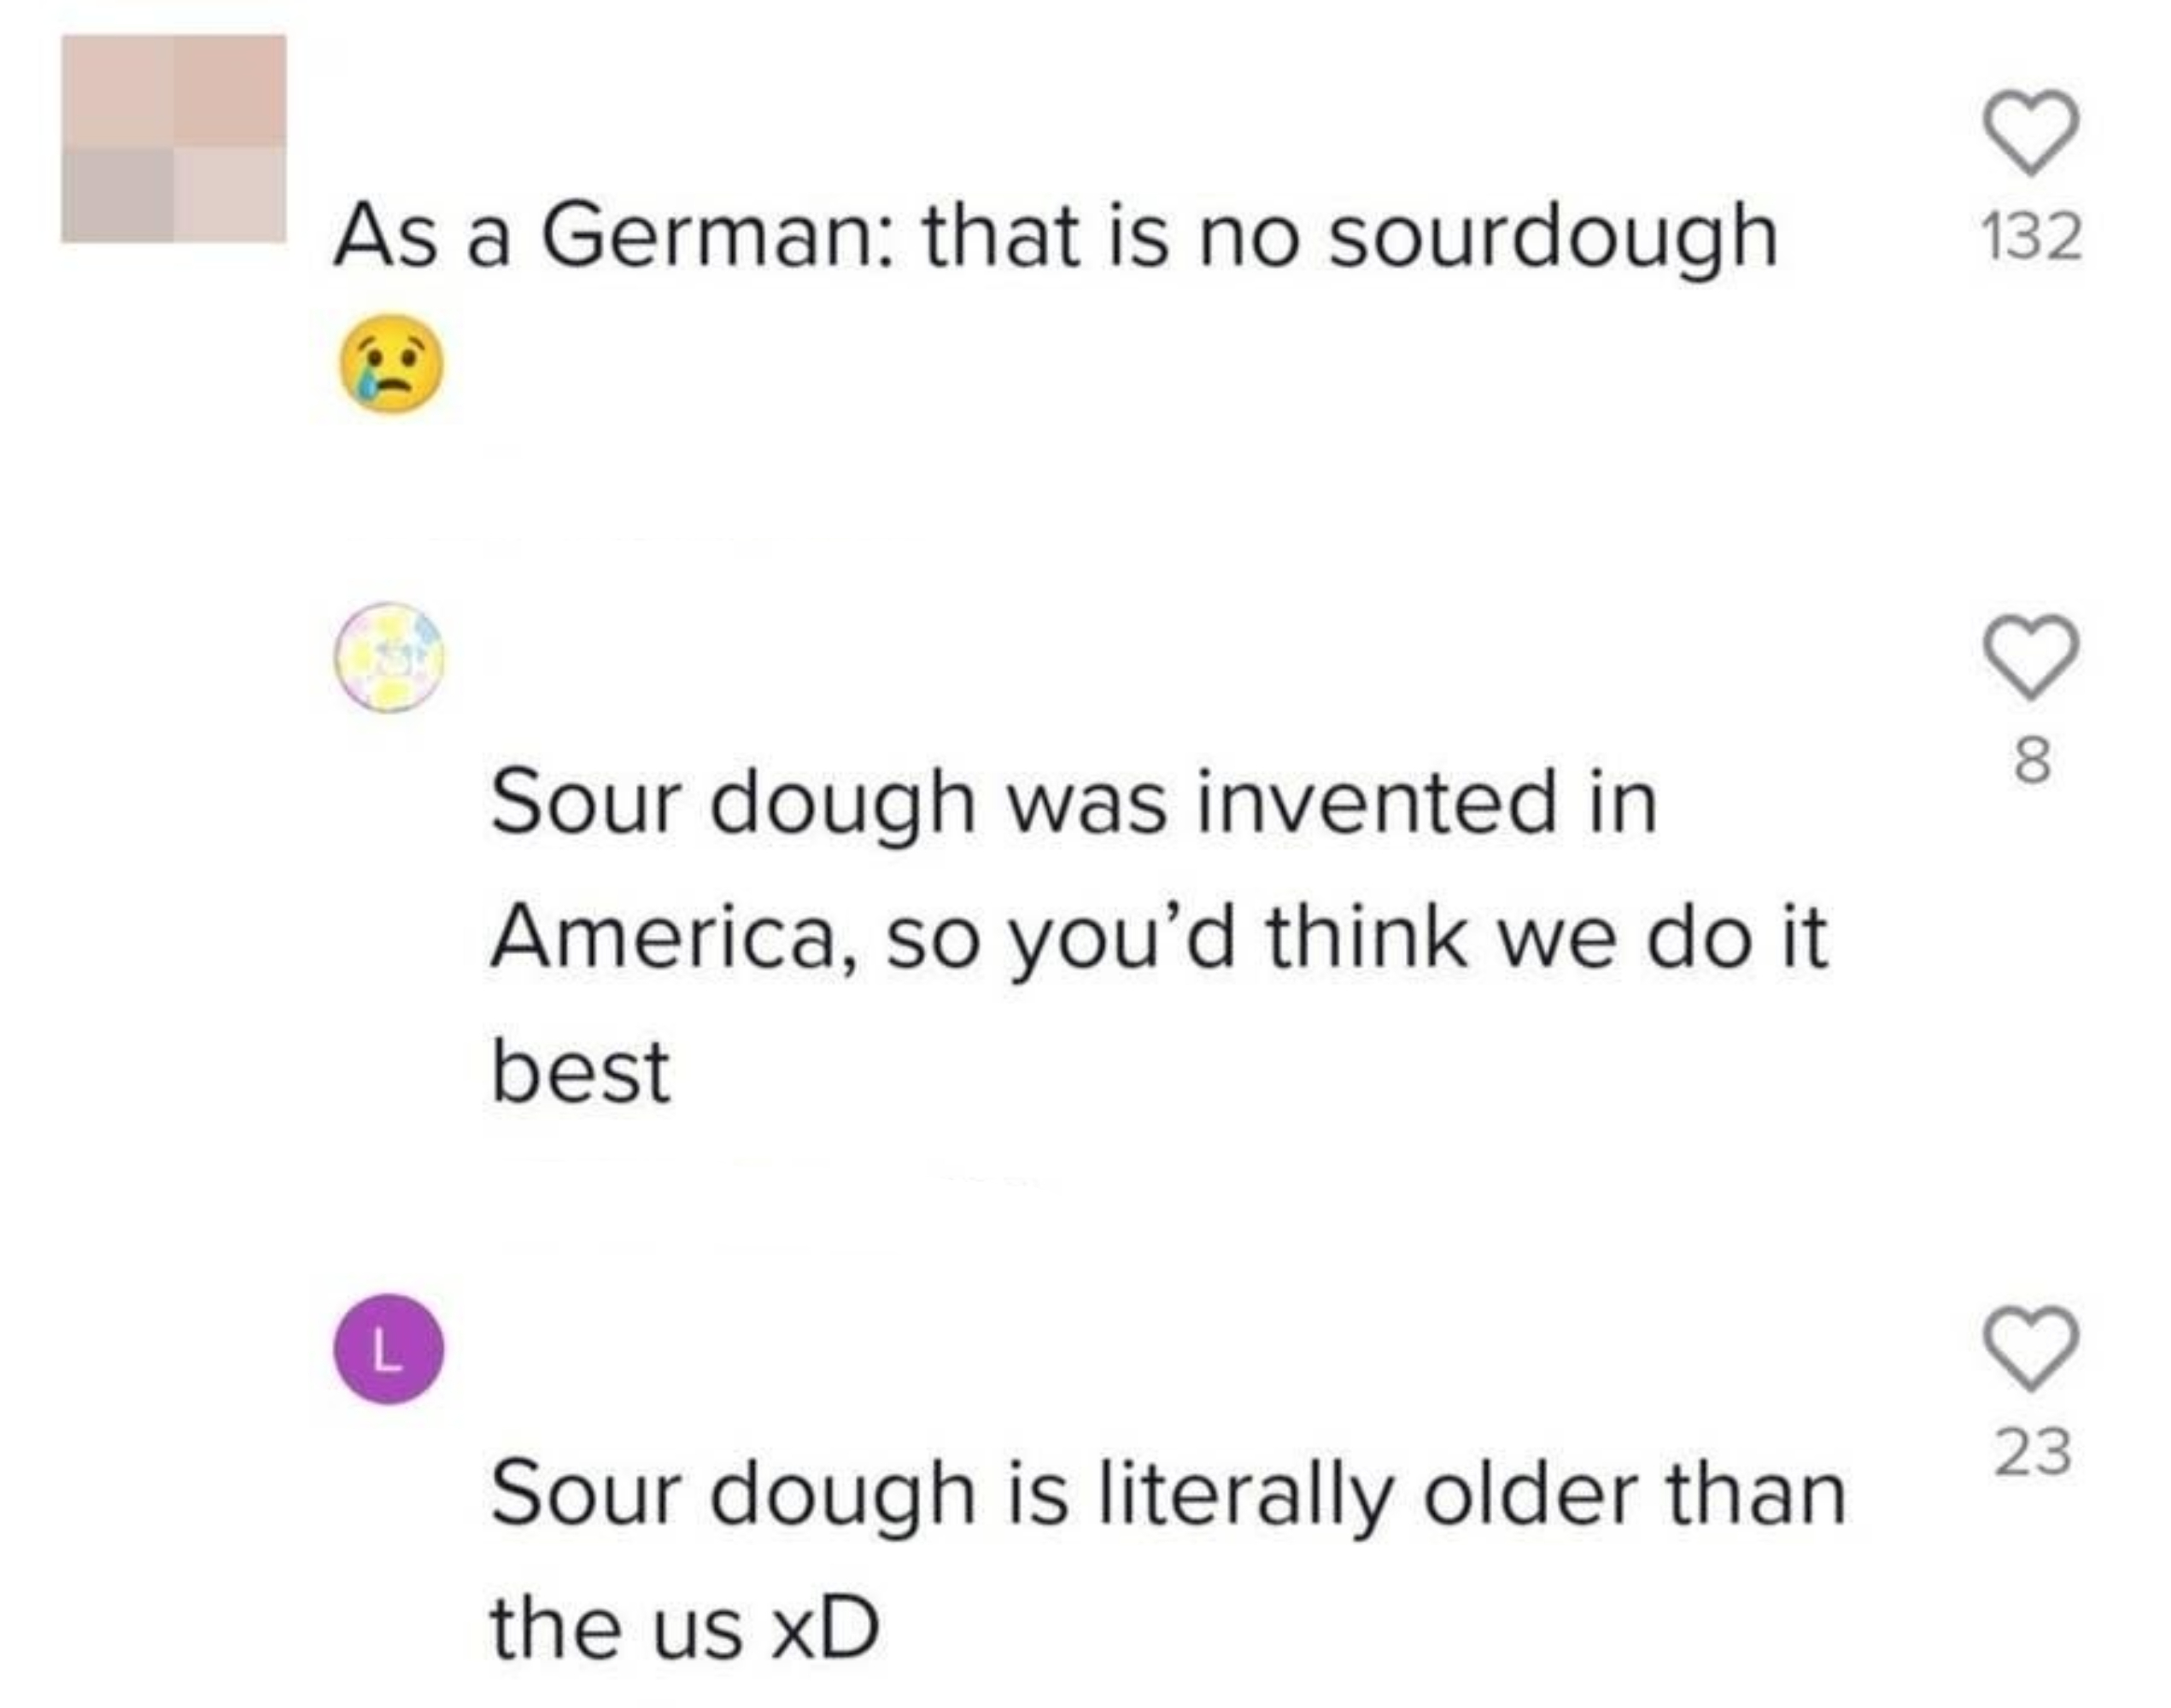 The image shows a screenshot of three social media comments debating whether sourdough bread originated from America, with differing opinions